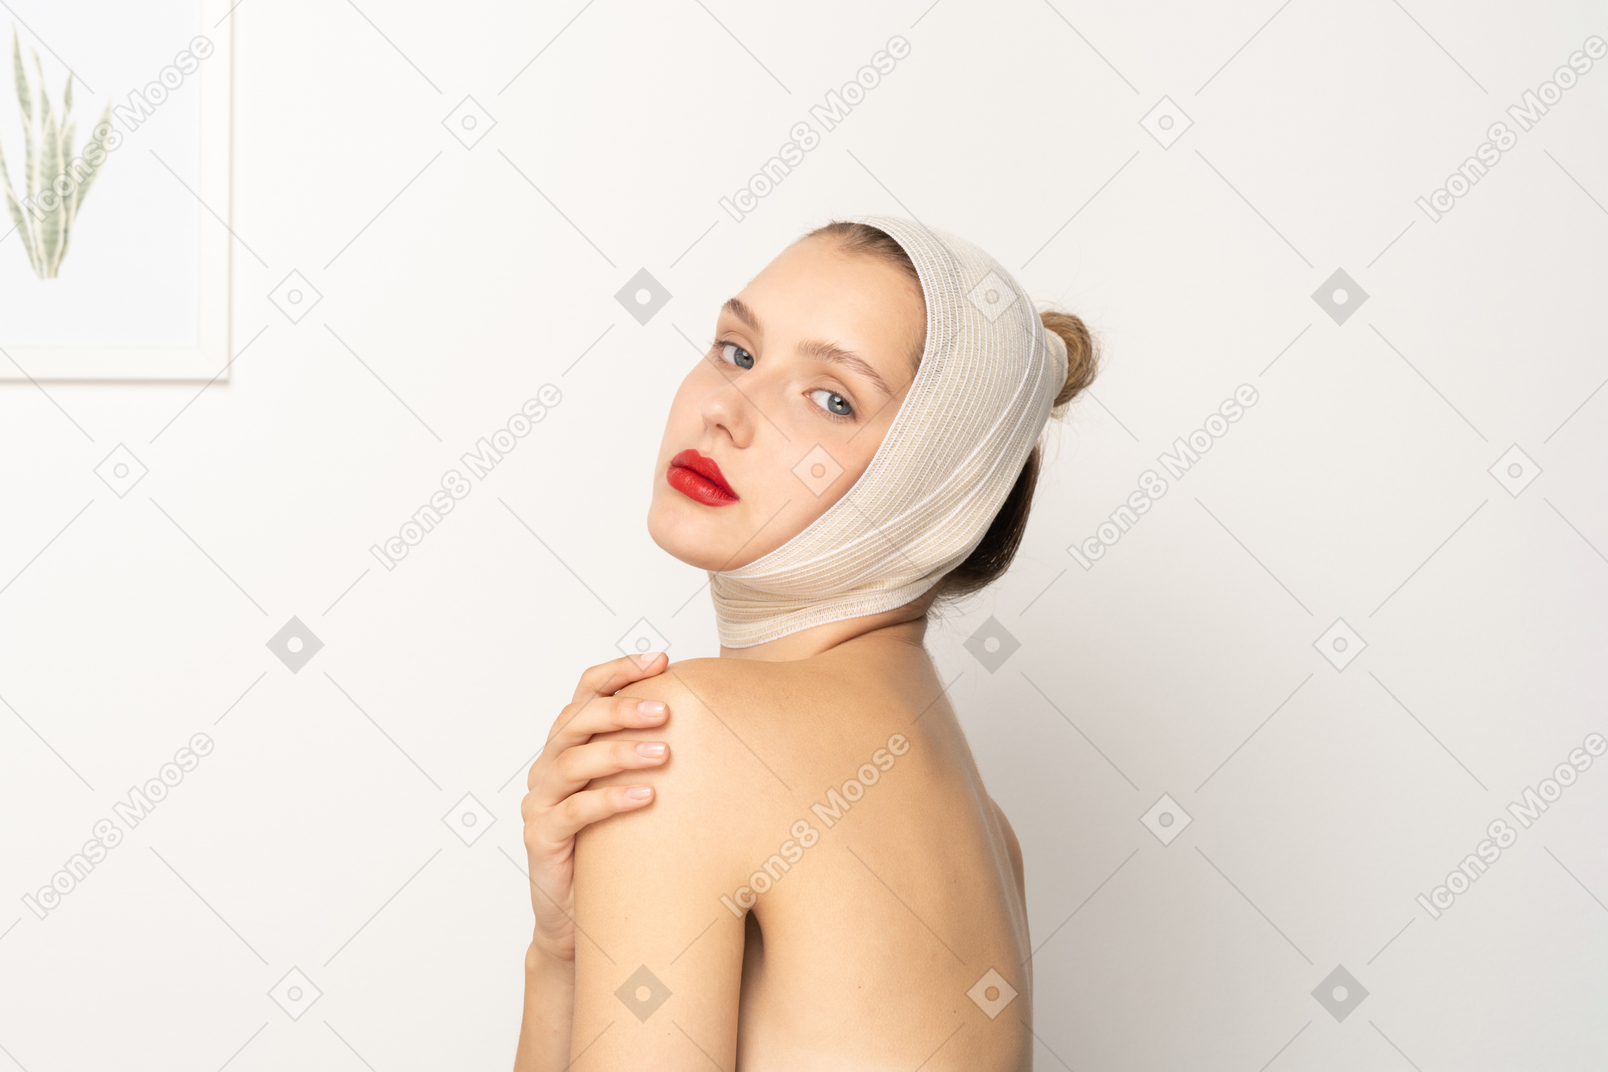 Woman with bandaged head touching her shoulder